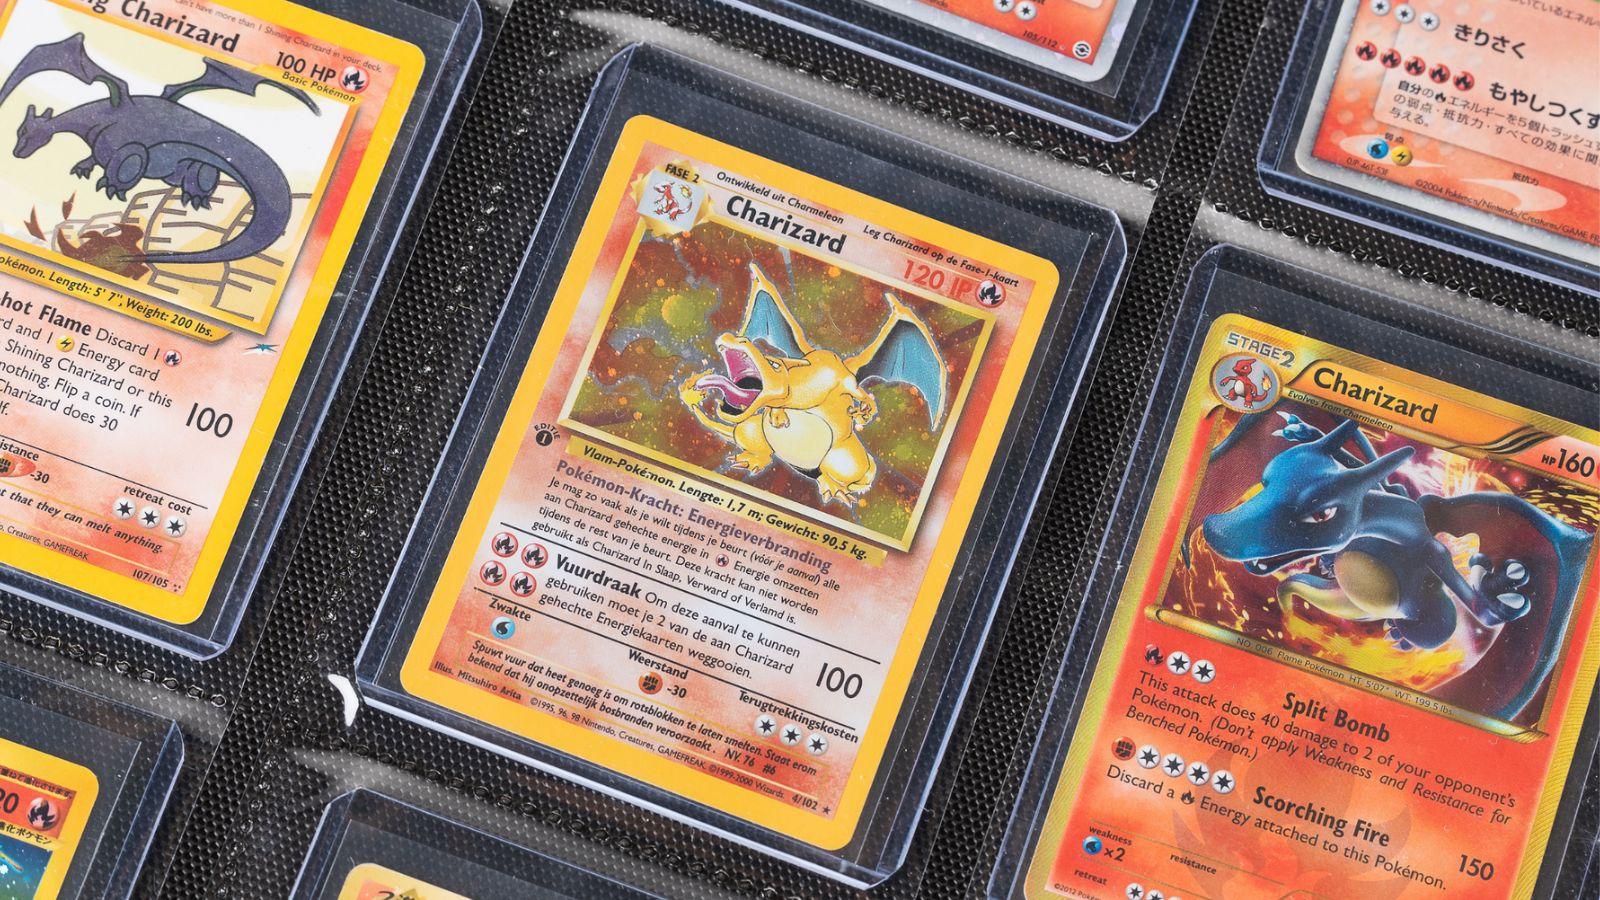 Best Pokemon binders for cards: Where to buy TCG binders, albums, and books  - Dexerto